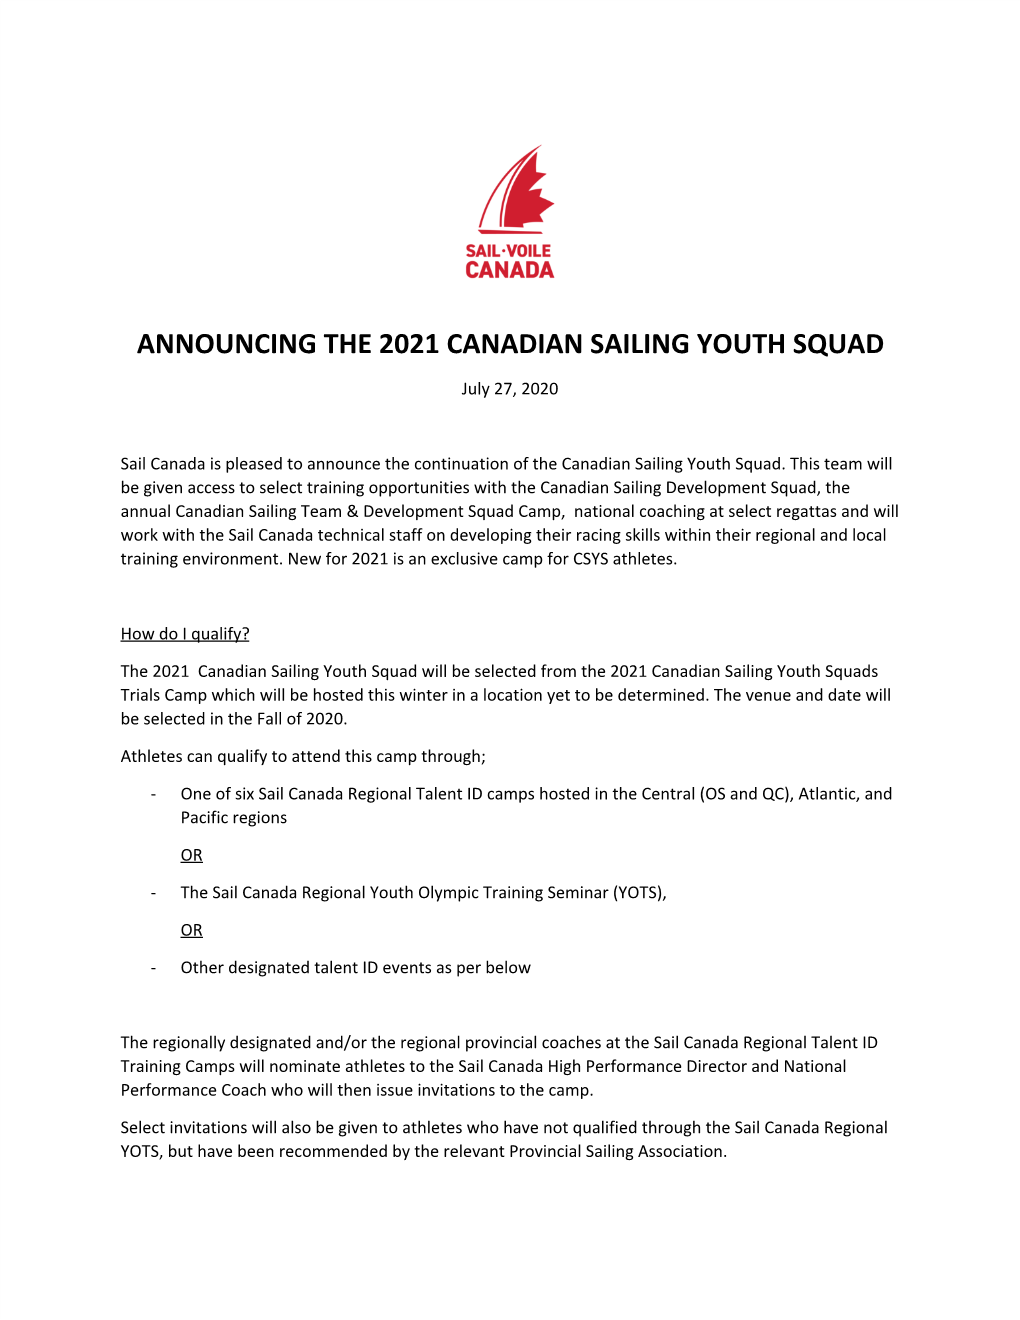 Announcing the 2021 Canadian Sailing Youth Squad